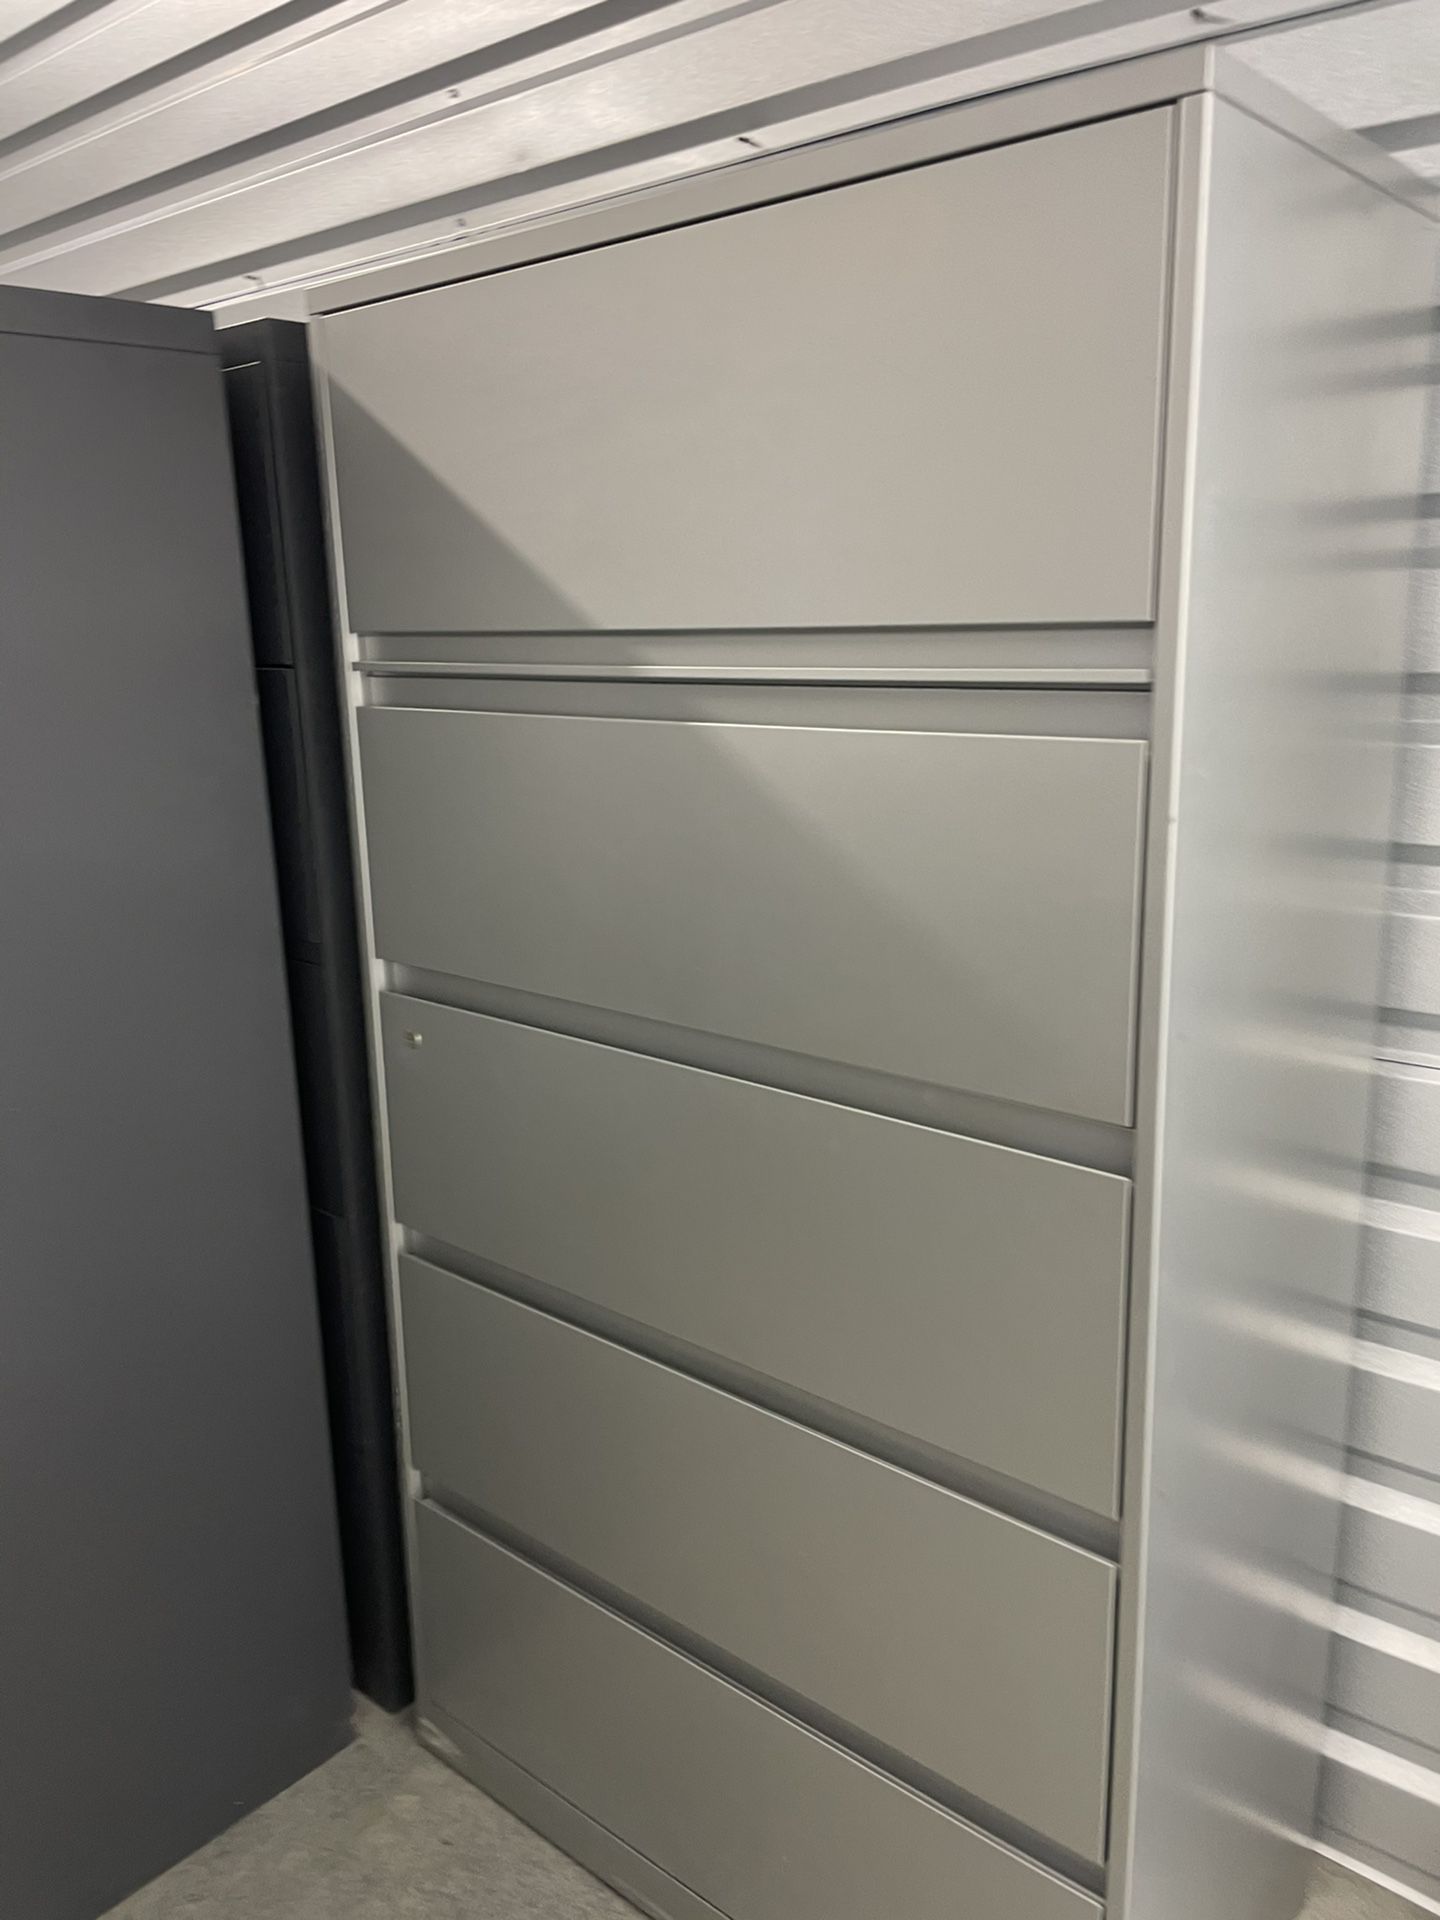 Two Identical Five Drawers Lateral Metal Filing Cabinets By The Steelcase Co. For Sale Price Per One Cabinet